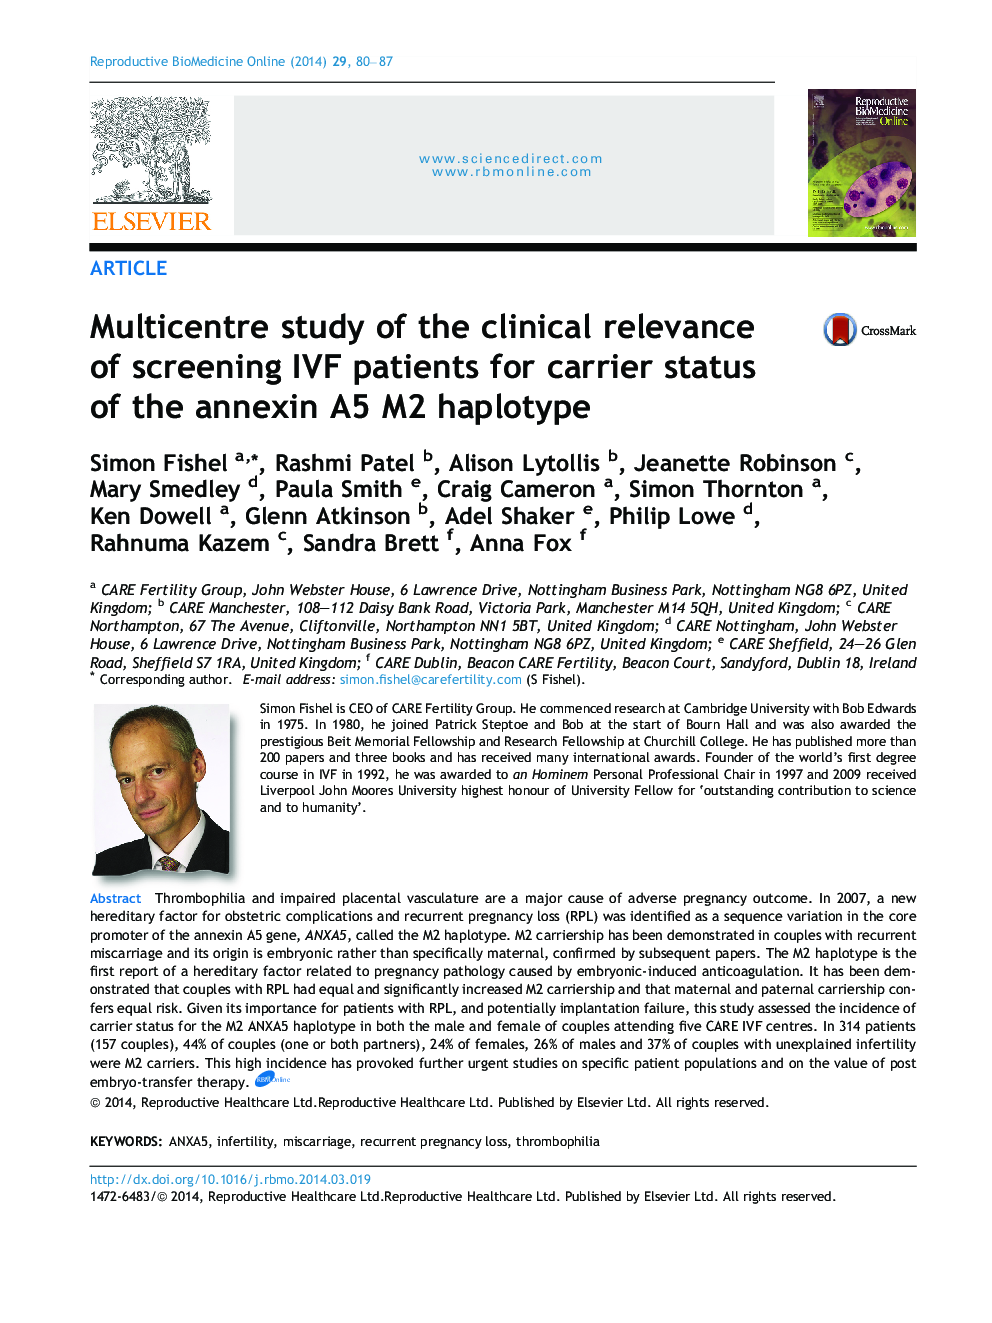 Multicentre study of the clinical relevance of screening IVF patients for carrier status of the annexin A5 M2 haplotype 